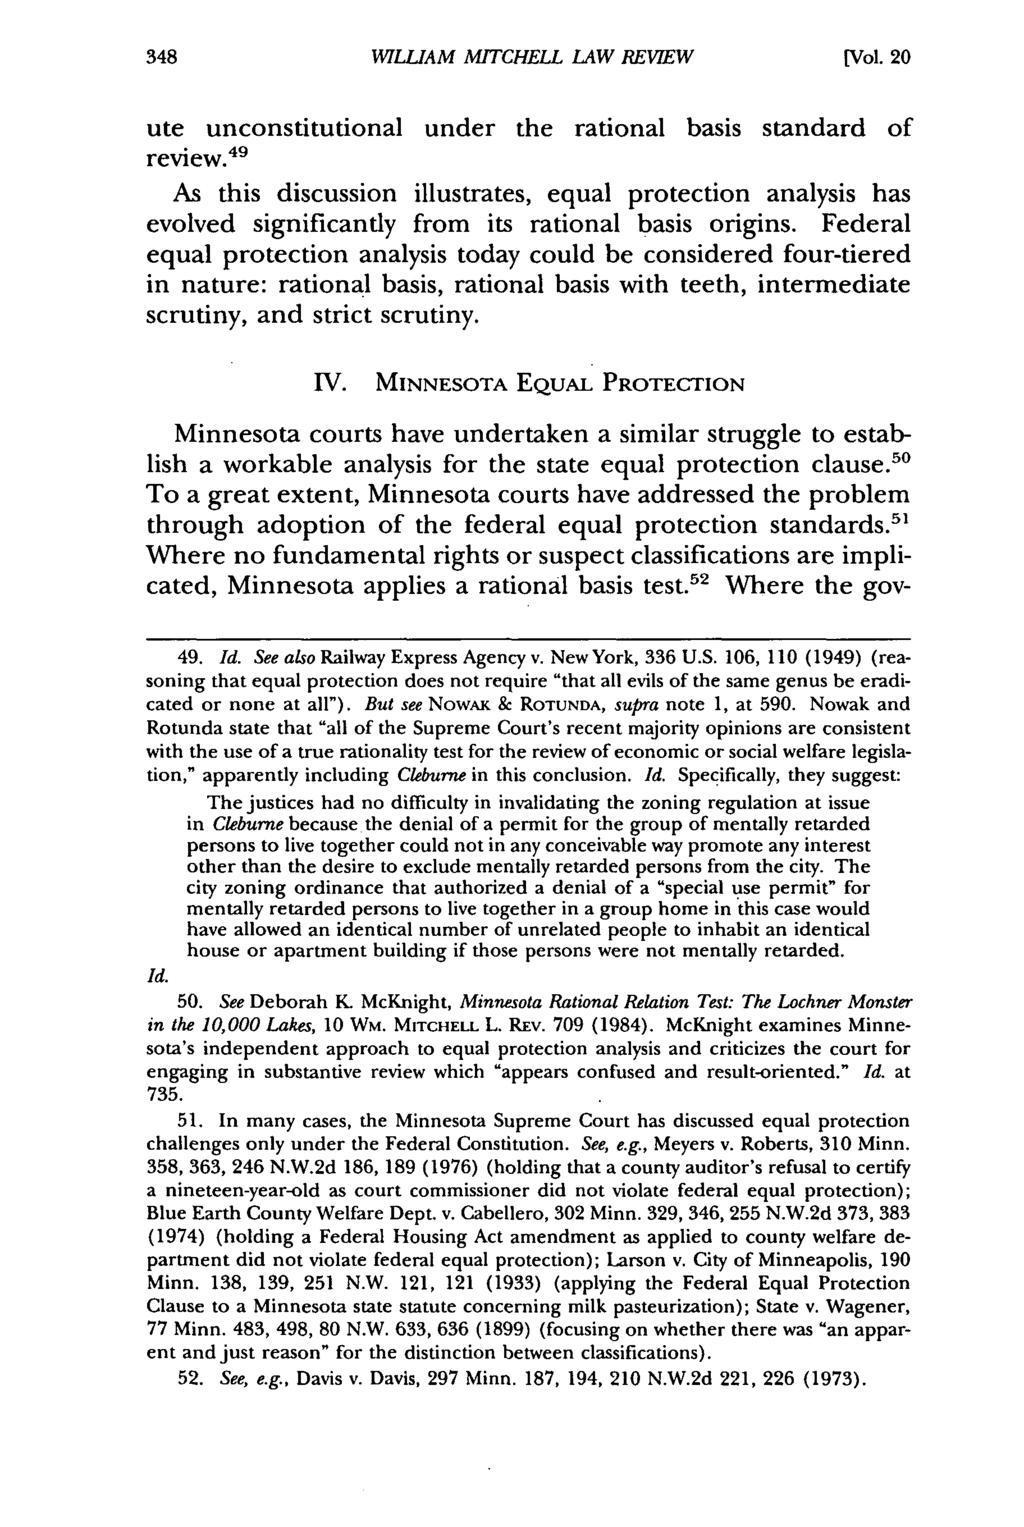 William Mitchell WILLIAM Law Review, MITCHELL Vol. 20, LAW Iss. 2 [1994], REVIEWArt. 5 [Vol. 20 ute unconstitutional under the rational basis standard of review.